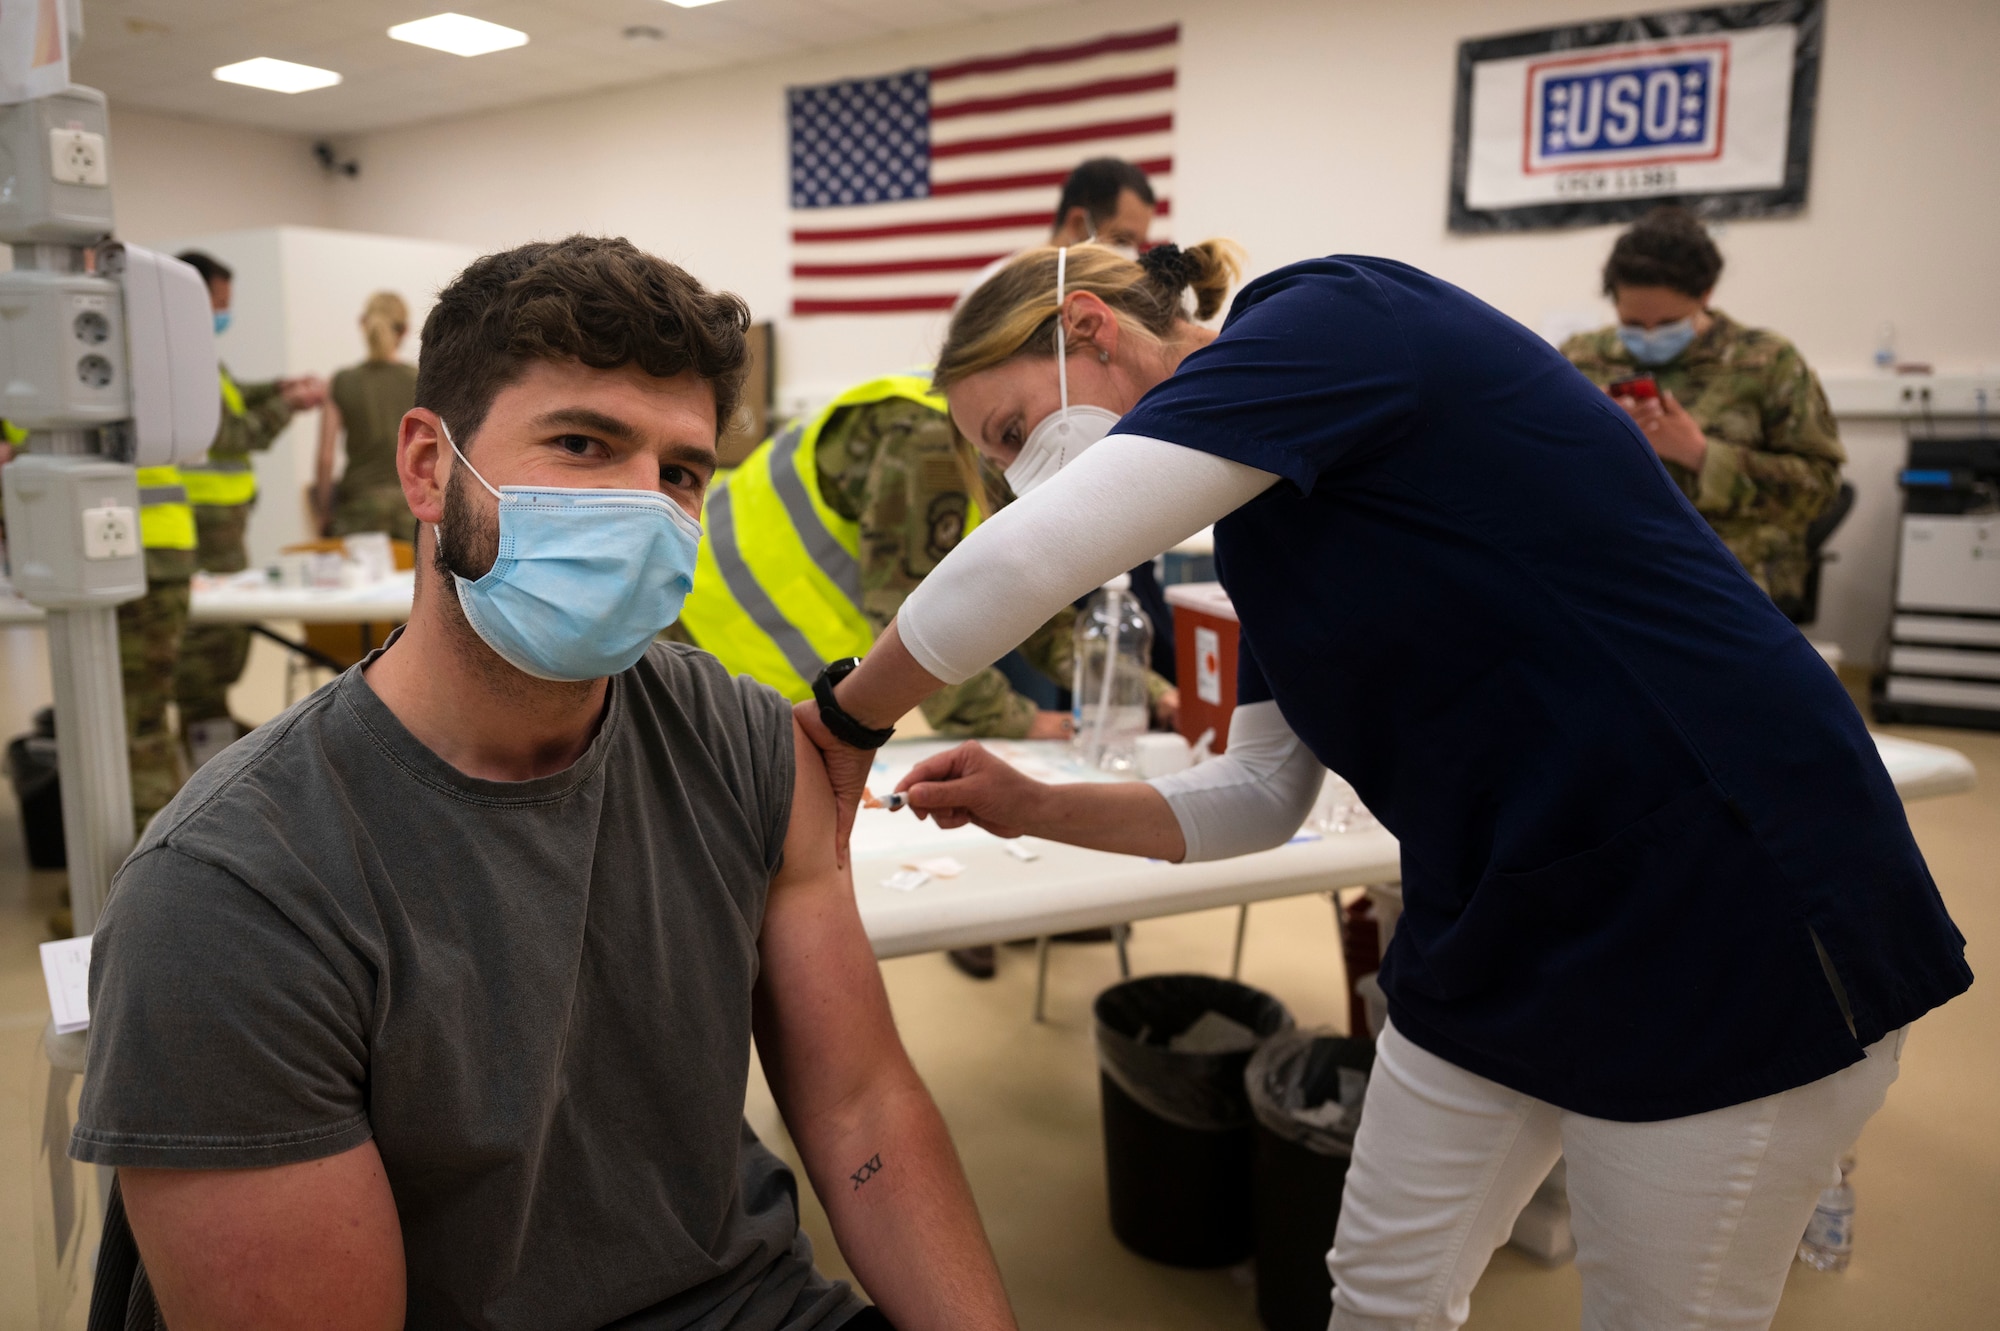 Benny Klein, 86th Civil Engineer Group accounting technician, receives a COVID-19 vaccine shot from Iris Geist, a German local national nurse, at Ramstein Air Base, Germany